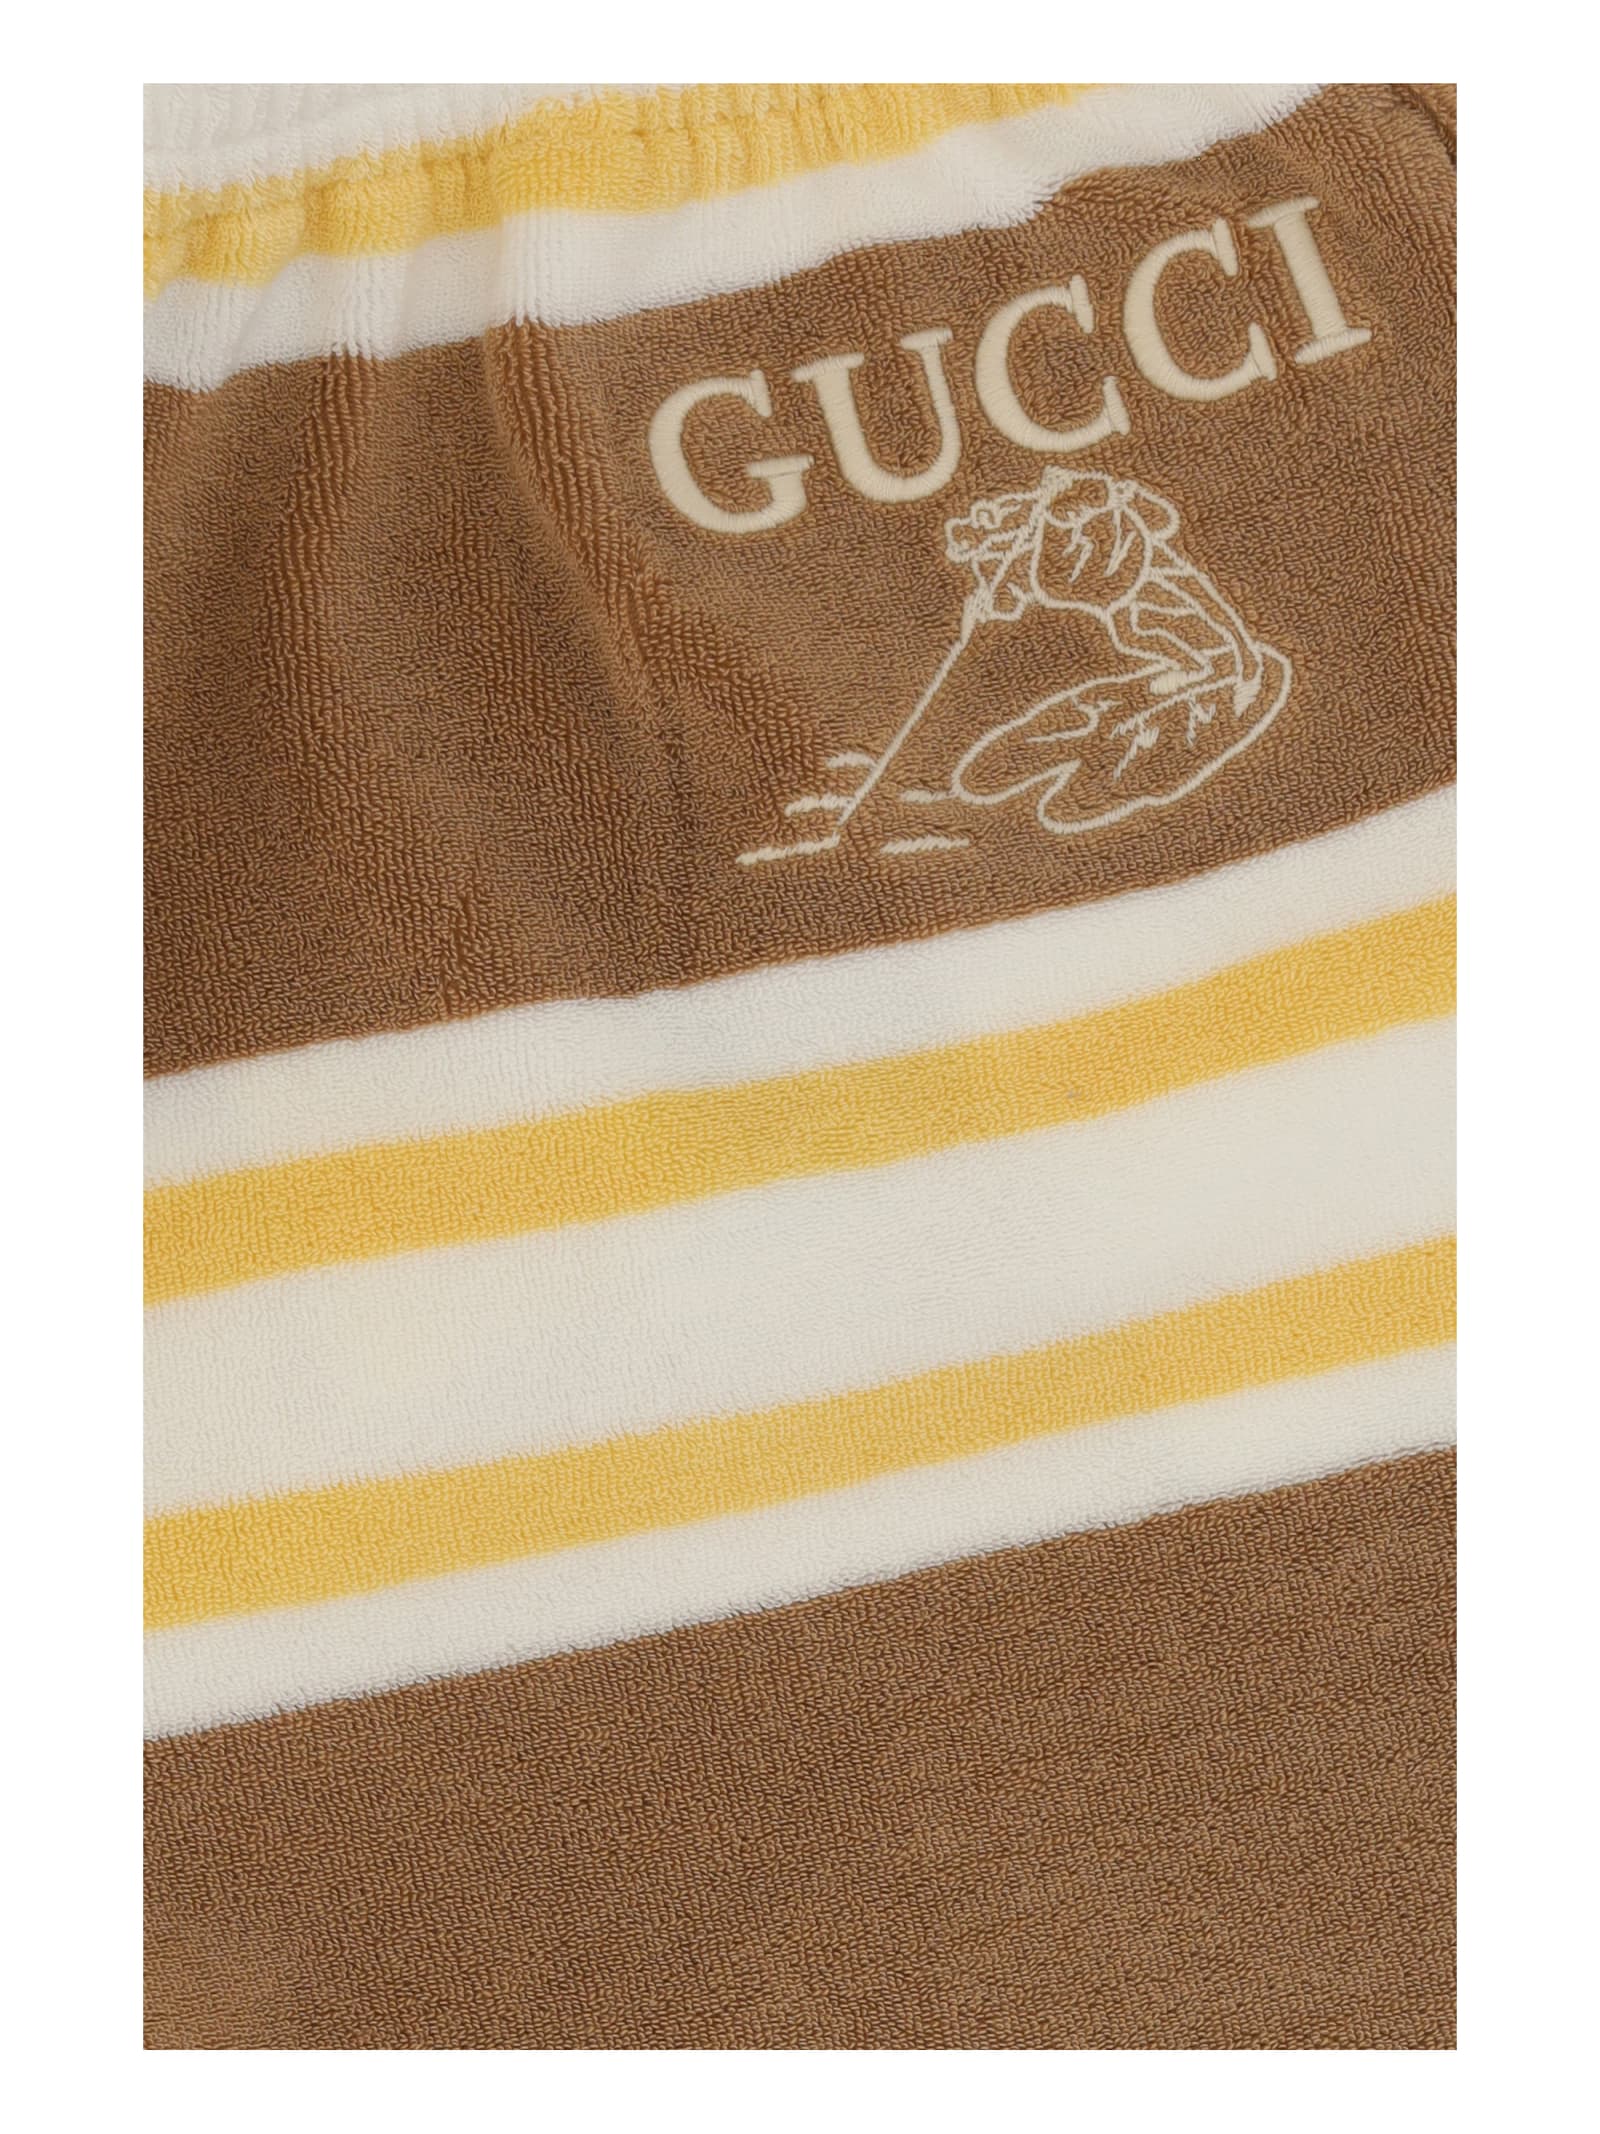 Shop Gucci Shorts For Boy In Giallo